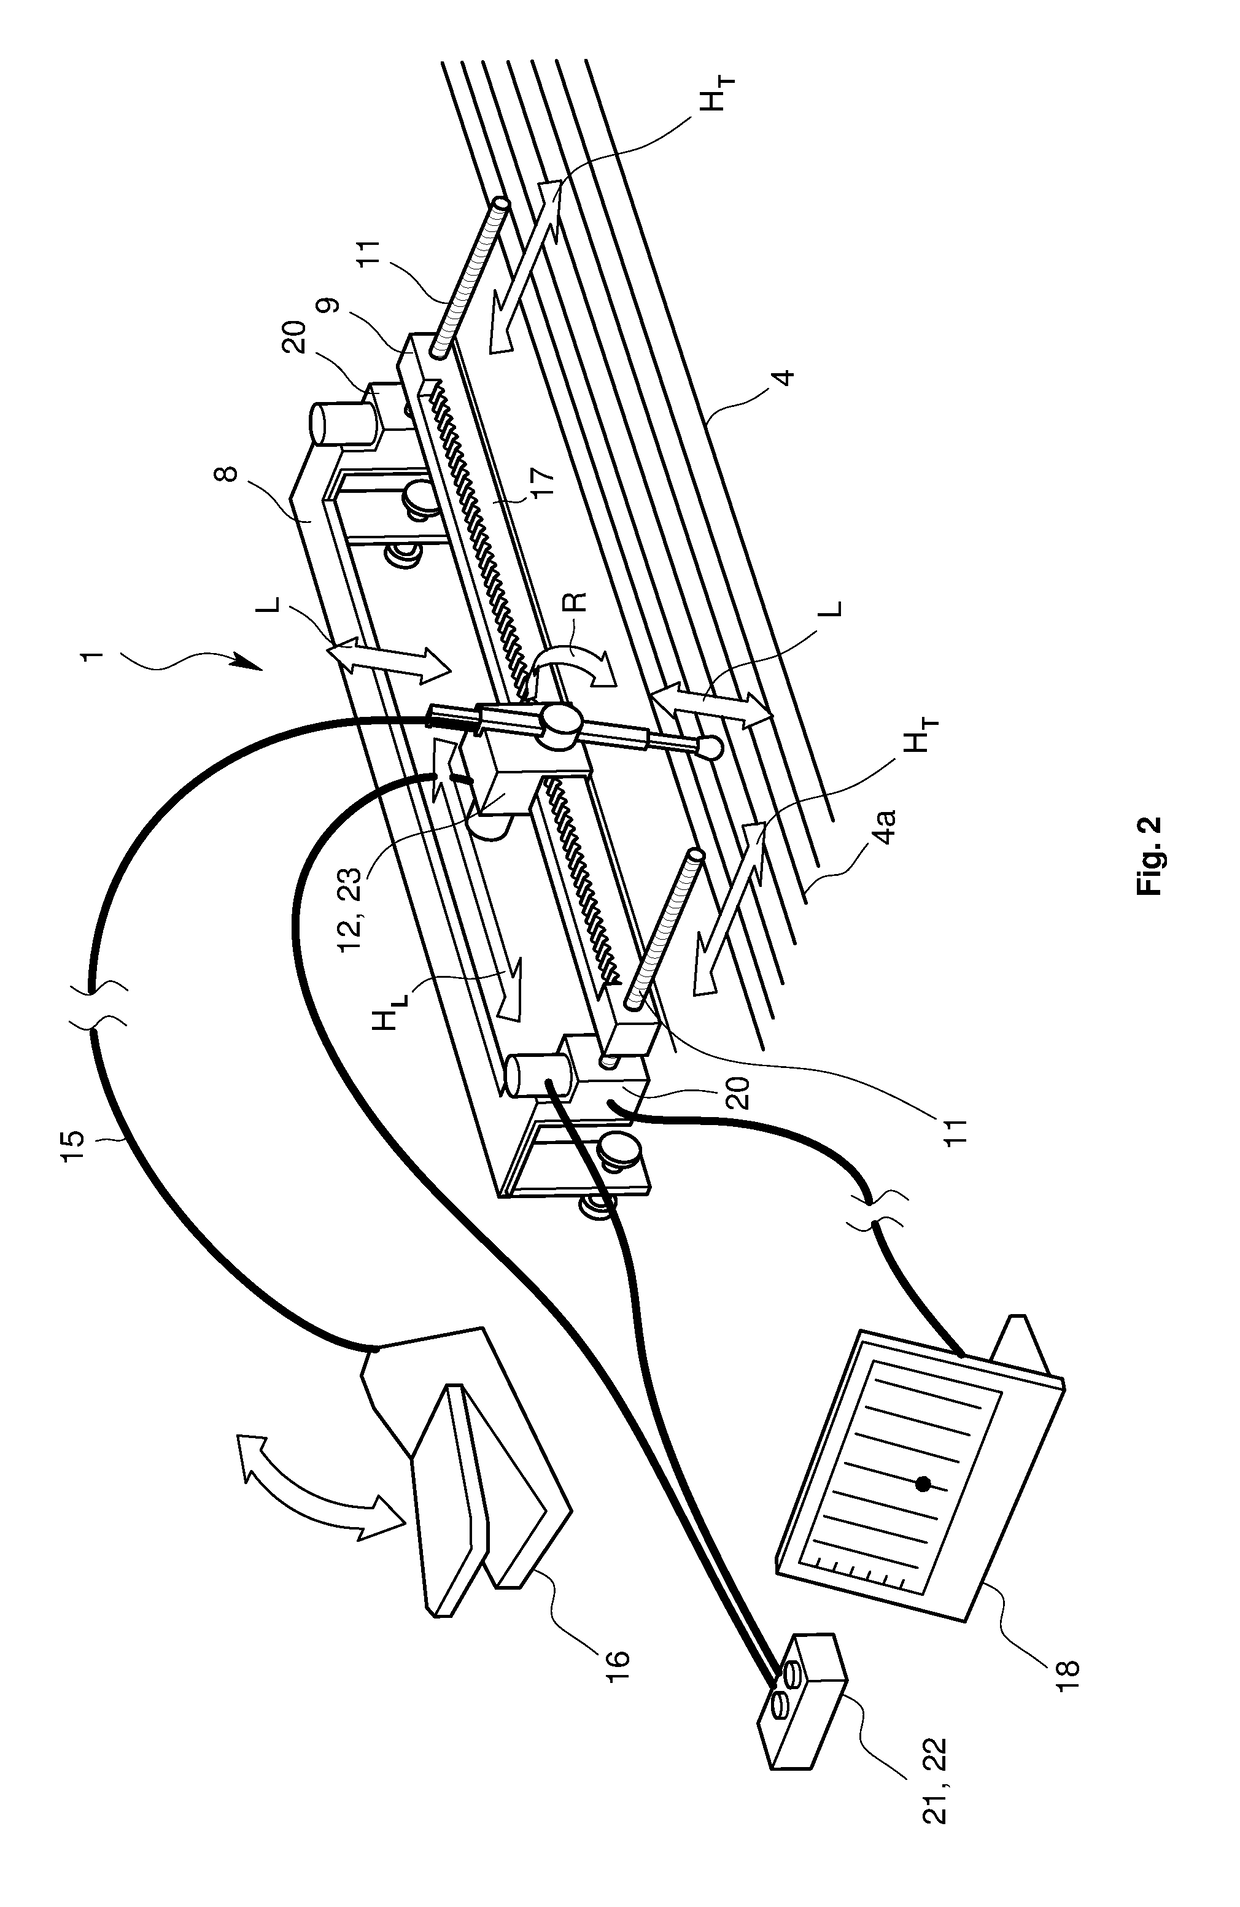 Apparatus and method for imparting acoustic effect to piano